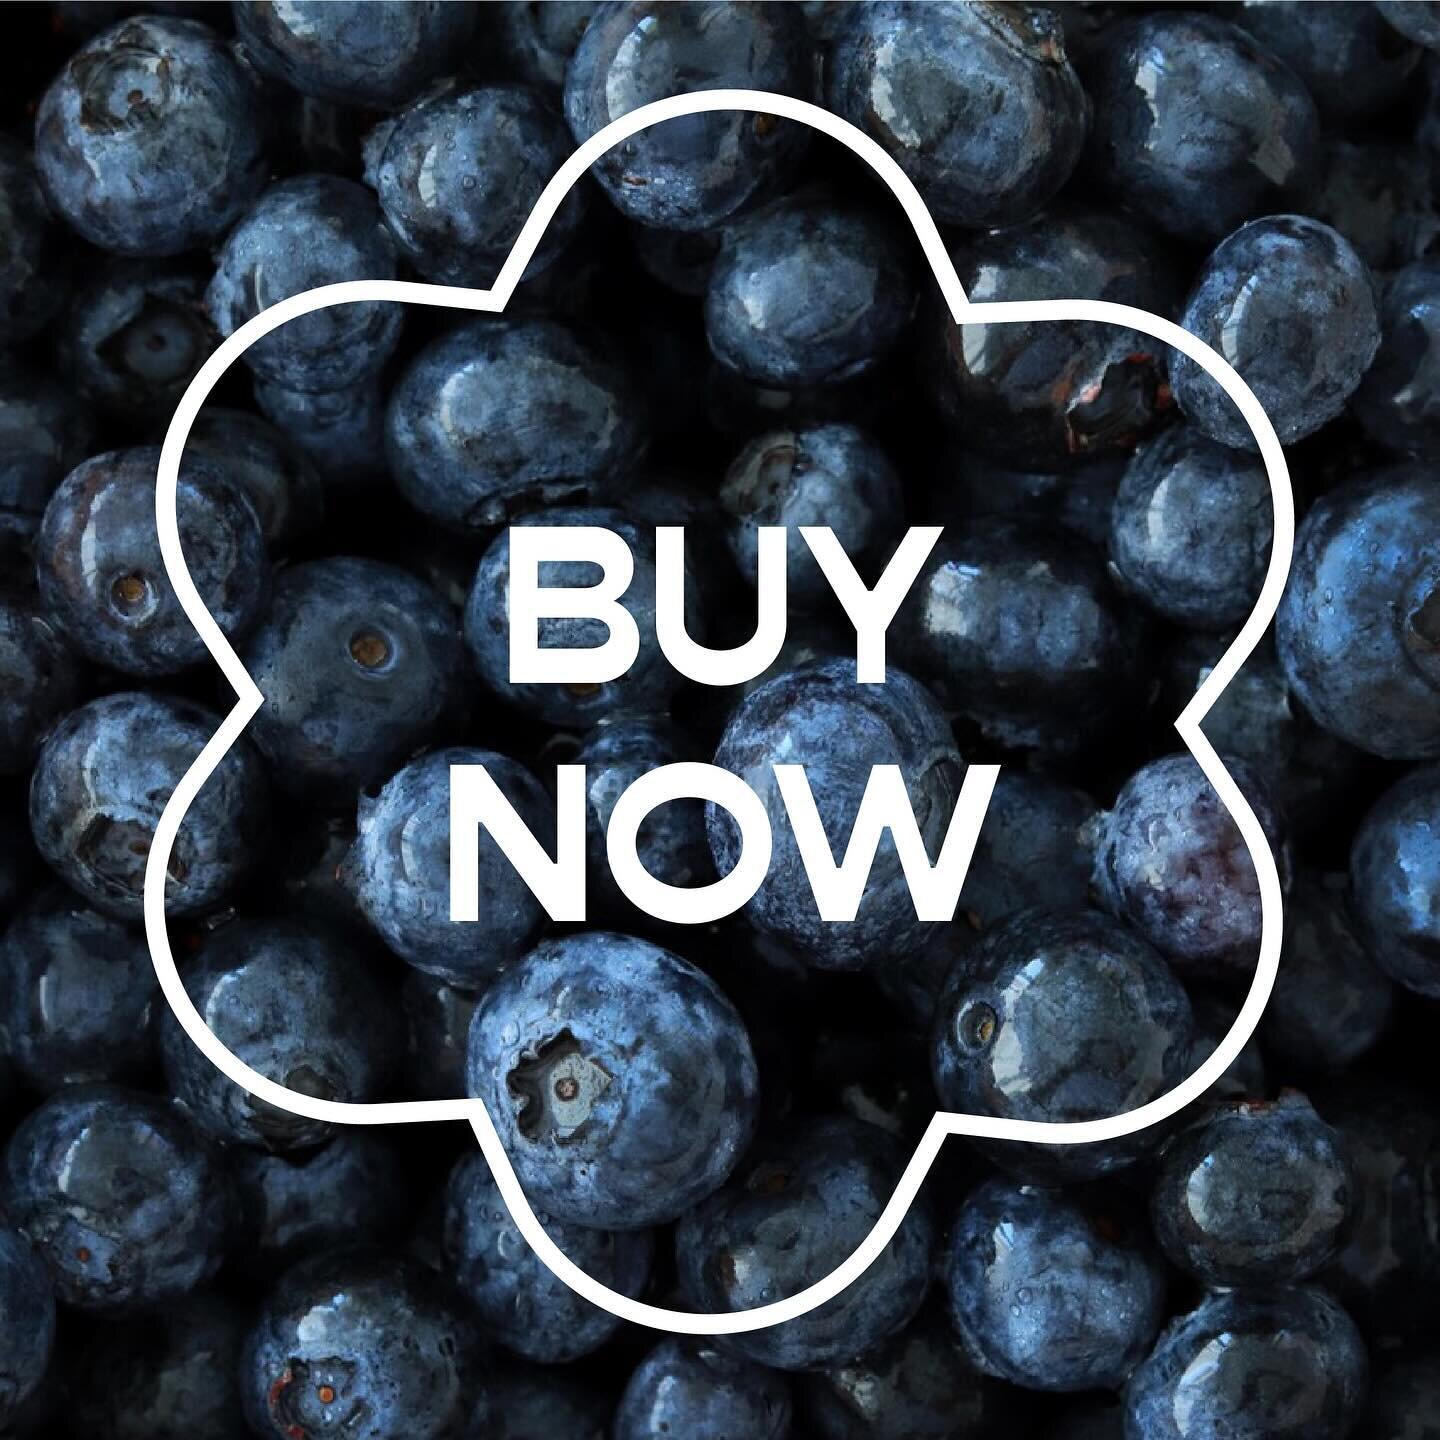 Exciting News! True Earth Organic Blueberries are now just a click away! 🫐

We&rsquo;re thrilled to announce that you can now enjoy the goodness of our premium organic blueberries from the comfort of your home.

Our commitment to providing you with 